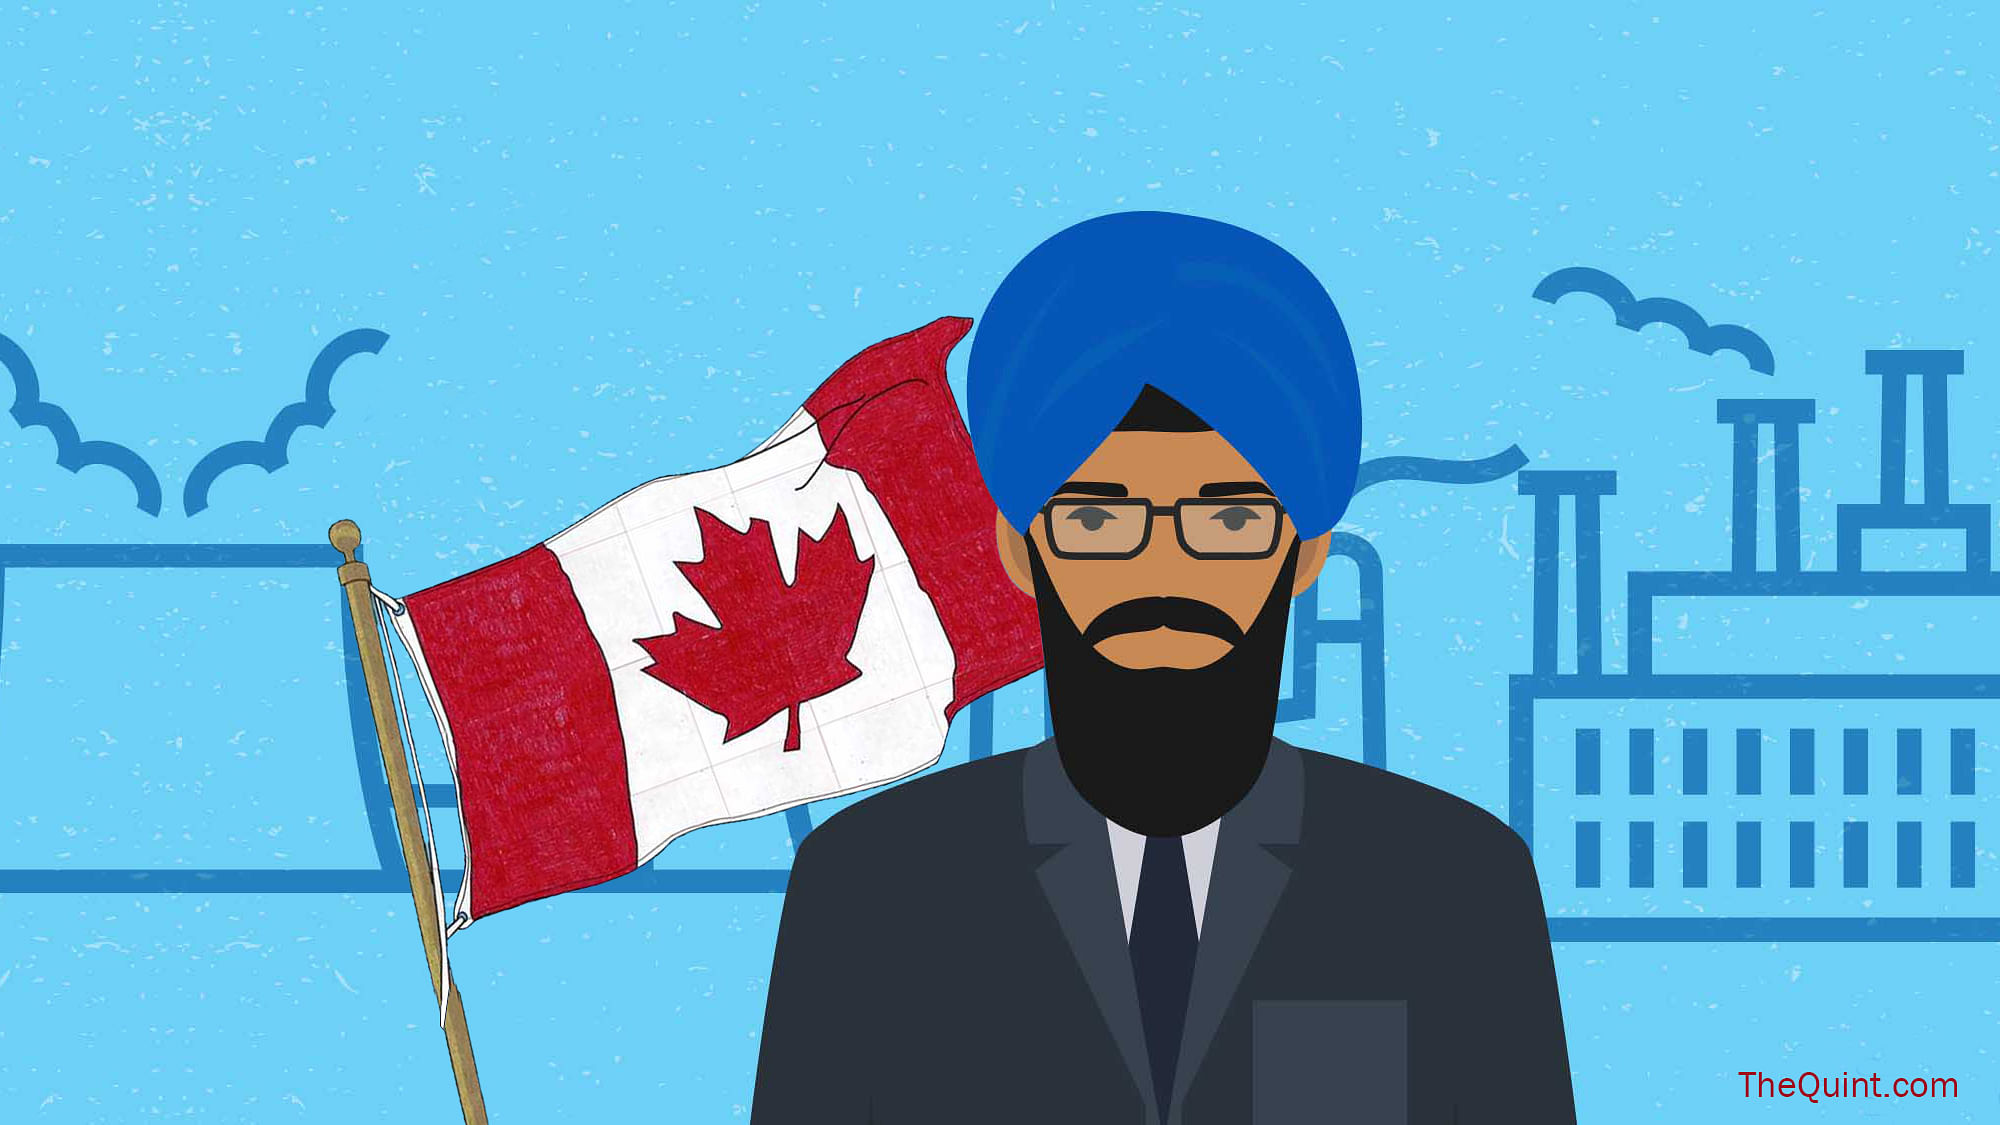 As Sikhs celebrate their imprint on Canada’s political turf, some concerns need to be addressed back home.